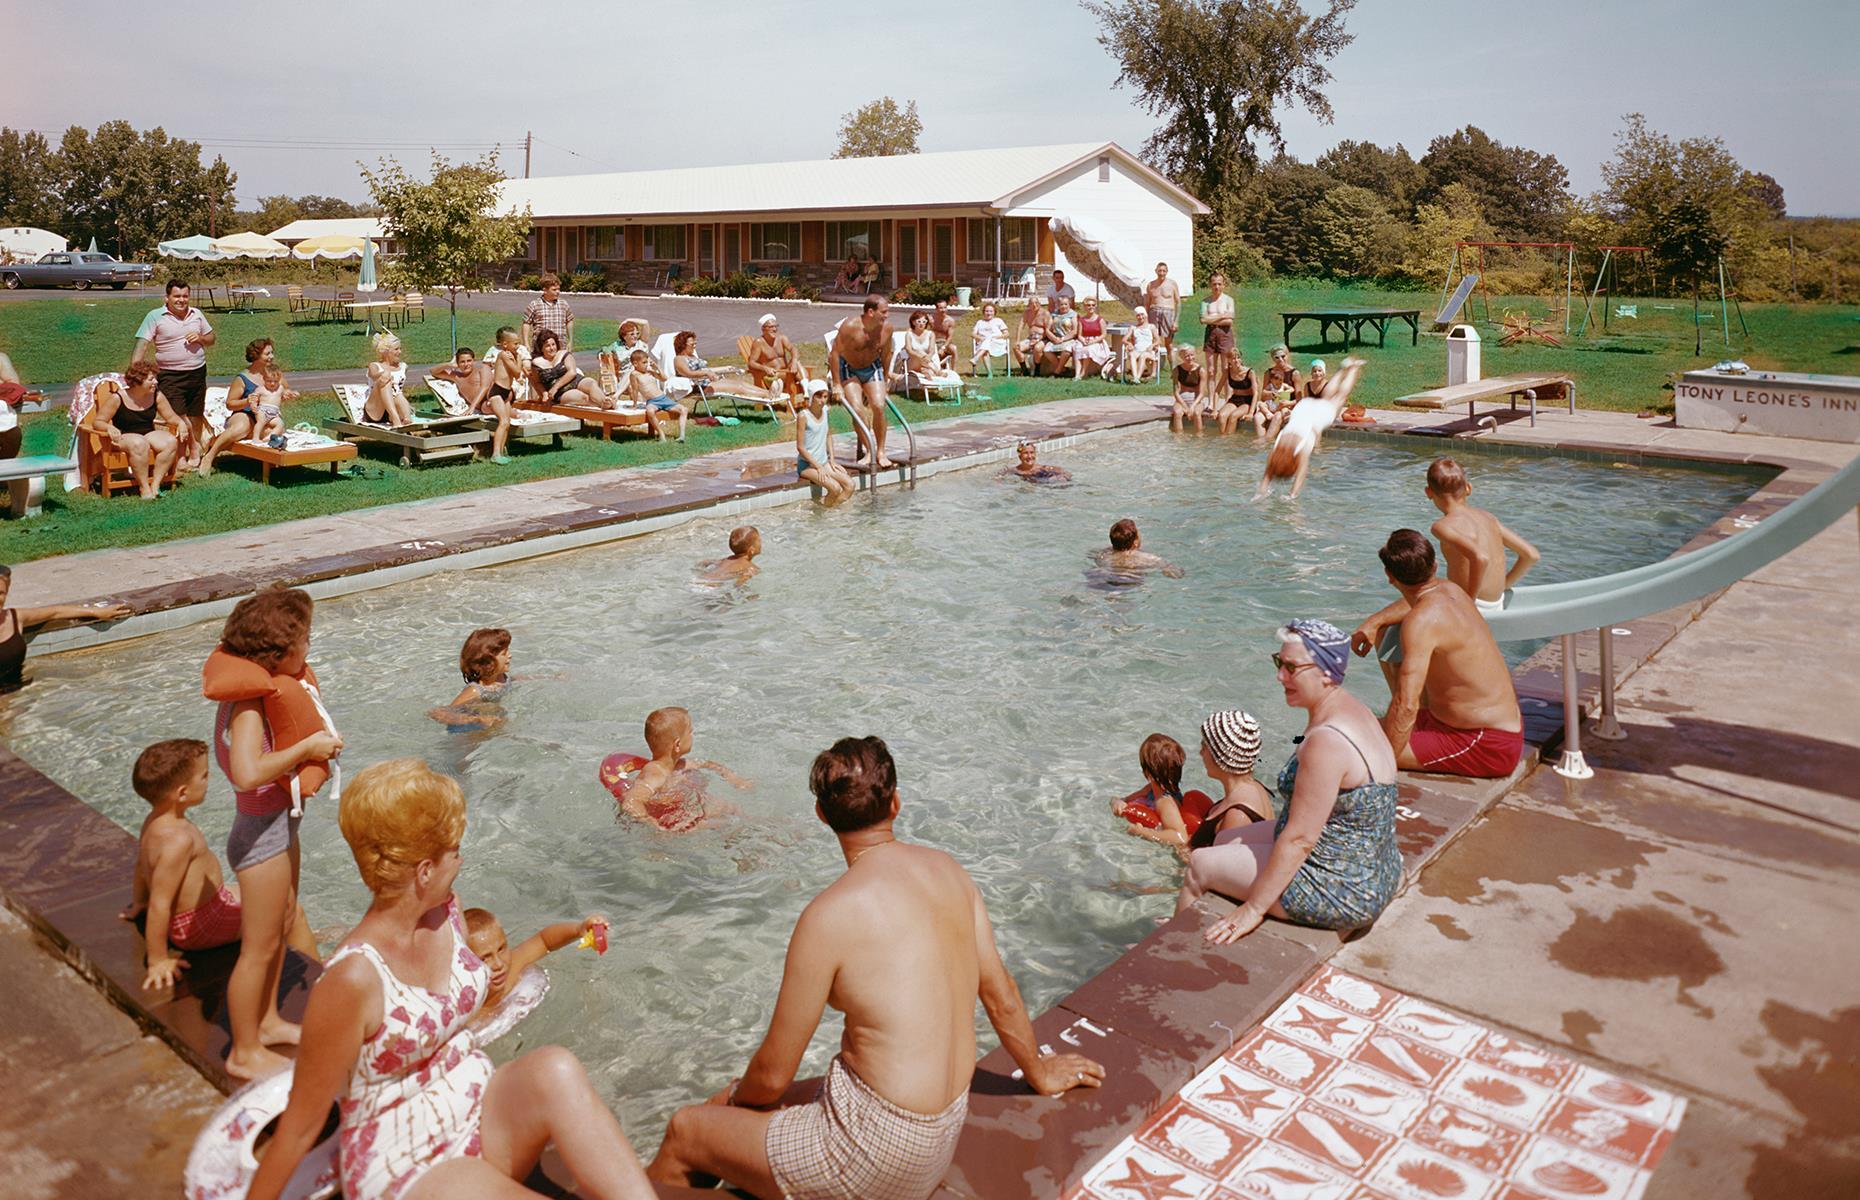 <p>By the 1960s, even more resorts had mushroomed in this beautiful area of New York state. In this 1960s shot, families enjoy a more laid-back, family-friendly vacation spot named Tony Leone's Resort, which came complete with a slide, swings and picnic benches. </p>  <p><strong><a href="http://bit.ly/3roL4wv">Love this? Follow our Facebook page for more travel inspiration</a></strong></p>